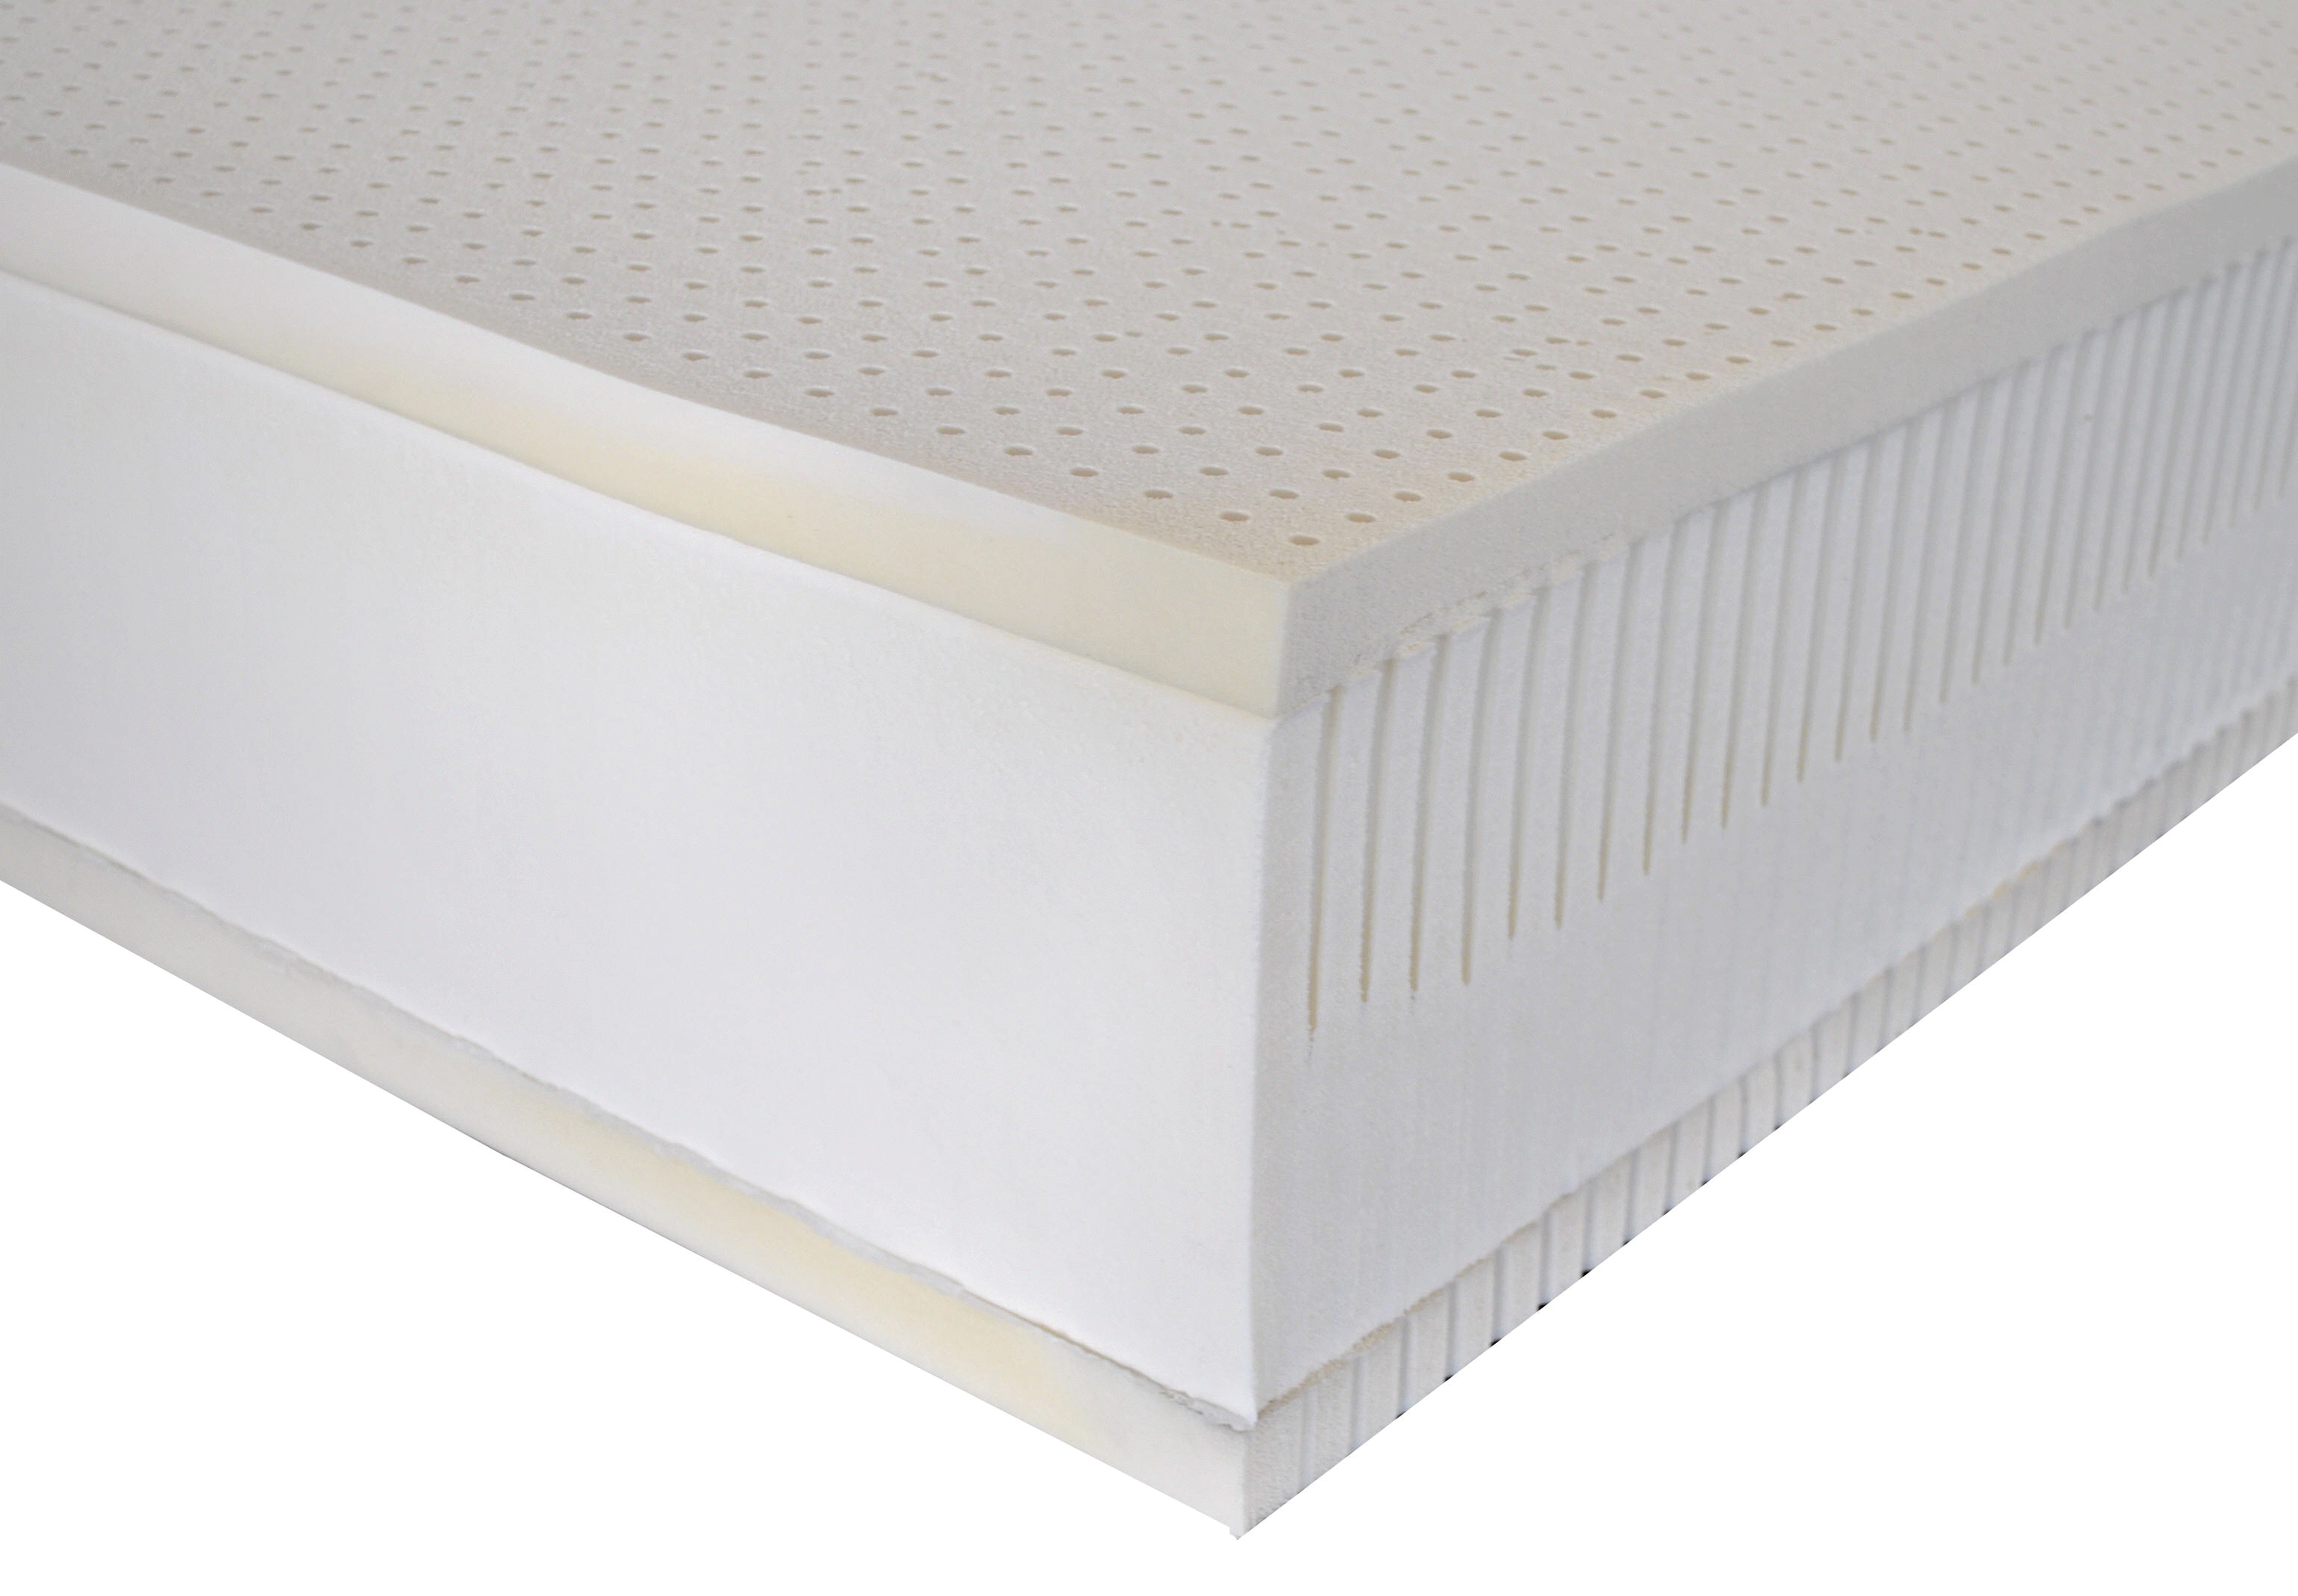 9" certified organic cotton and wool latex-pedic natural bed